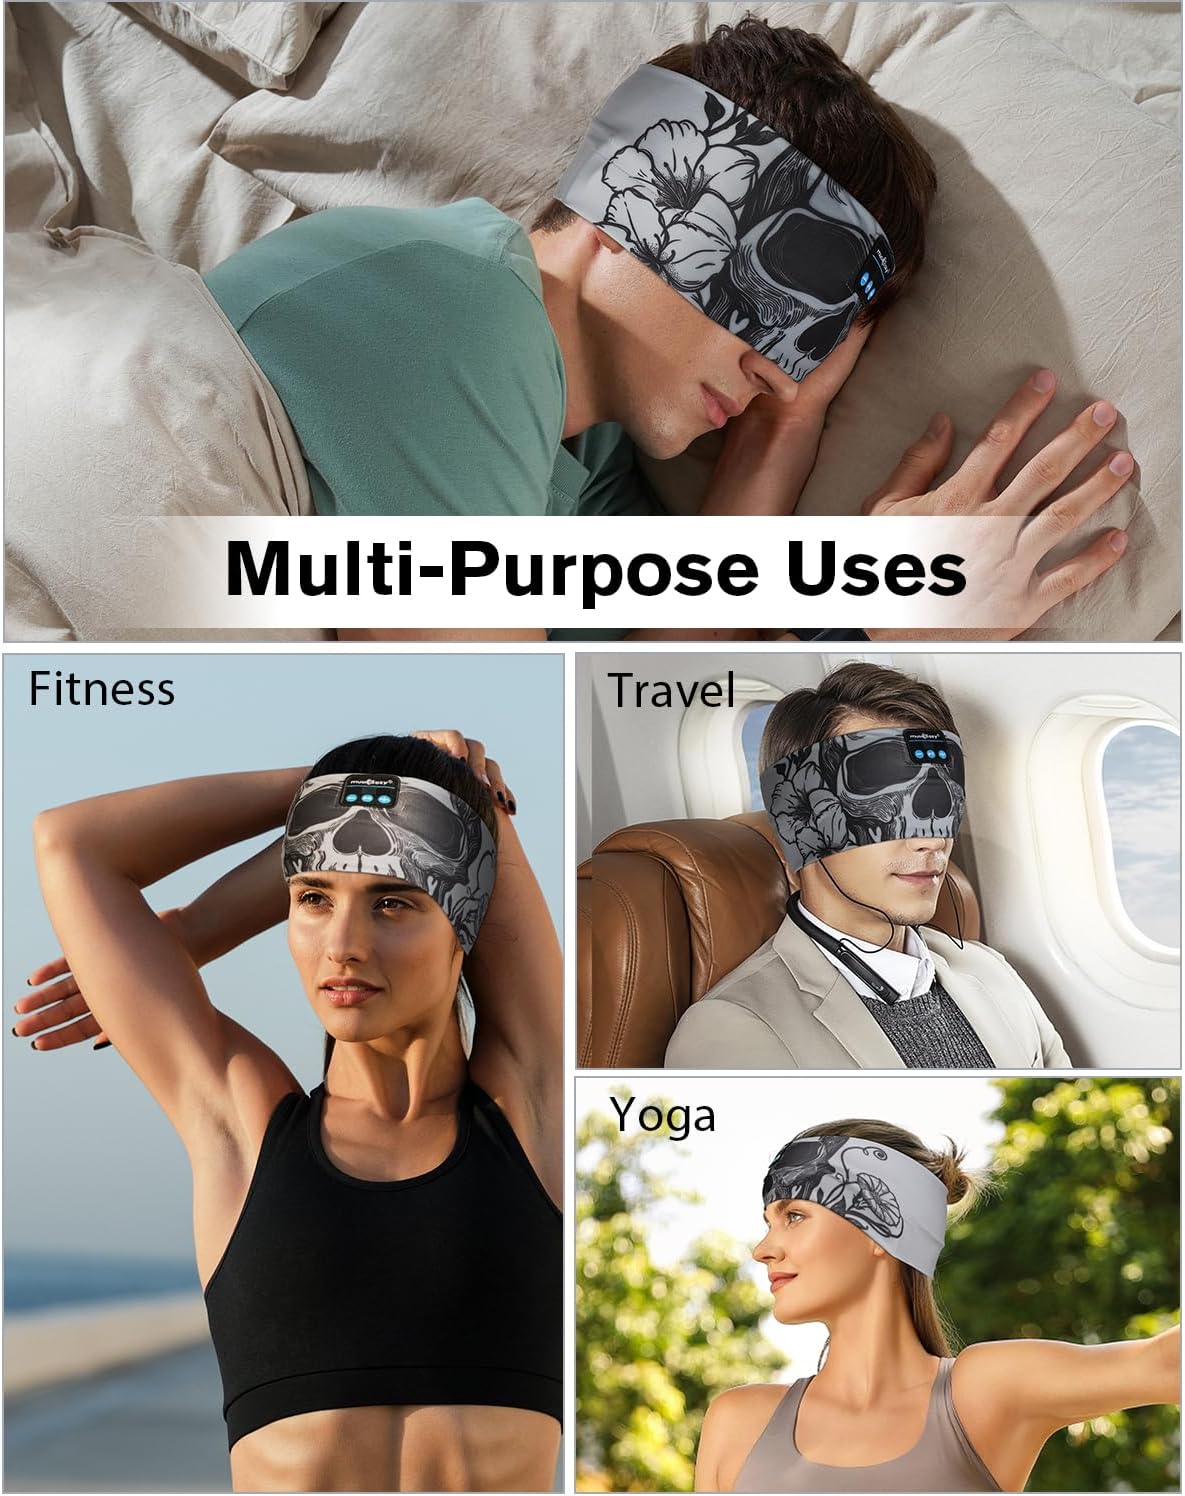 Musicozy Sleep Headphones Bluetooth 5.2 Headband, Sports Wireless Earphones Sweat Resistant Earbuds With Ultra-Thin Hd Stereo Speaker For Workout Running Cool Gadgets Unique Gifts